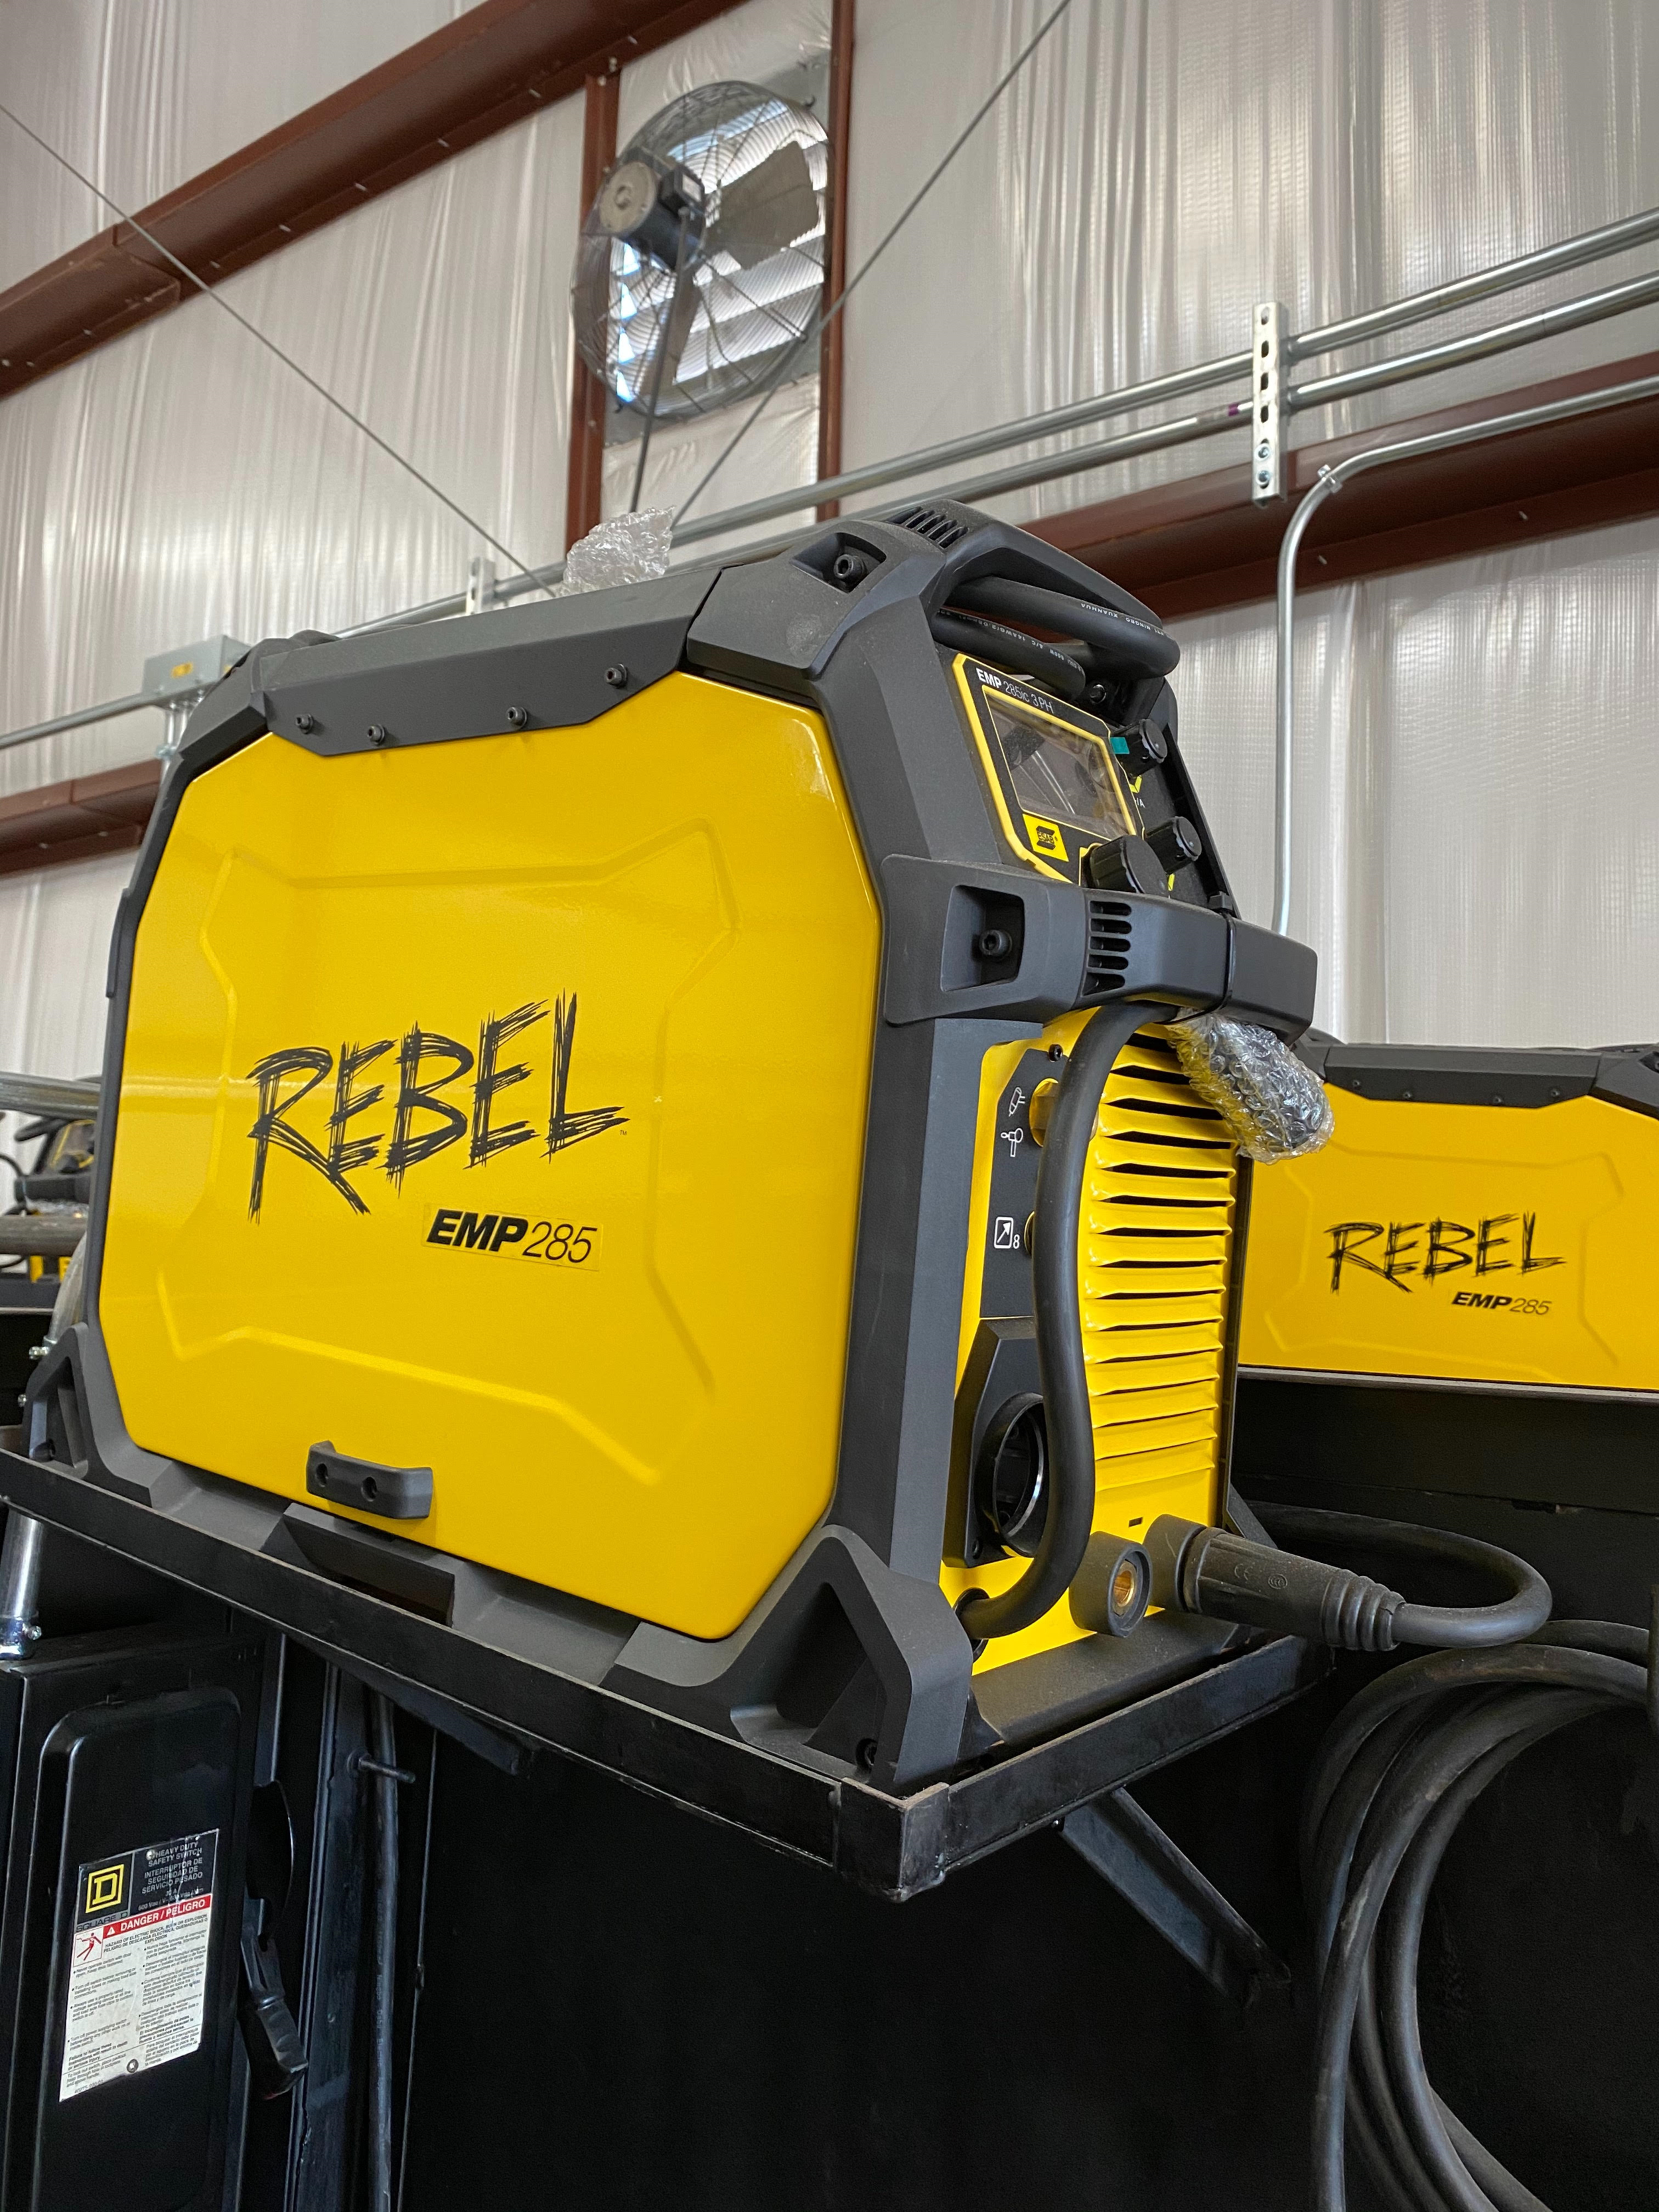  Precision Welding Academy&nbsp;is powered by&nbsp;ESAB and&nbsp;the Academy&nbsp;is fully equipped with&nbsp;Rebel 285 in its booths.&nbsp; The most powerful and industrial multi-process Rebel yet! 